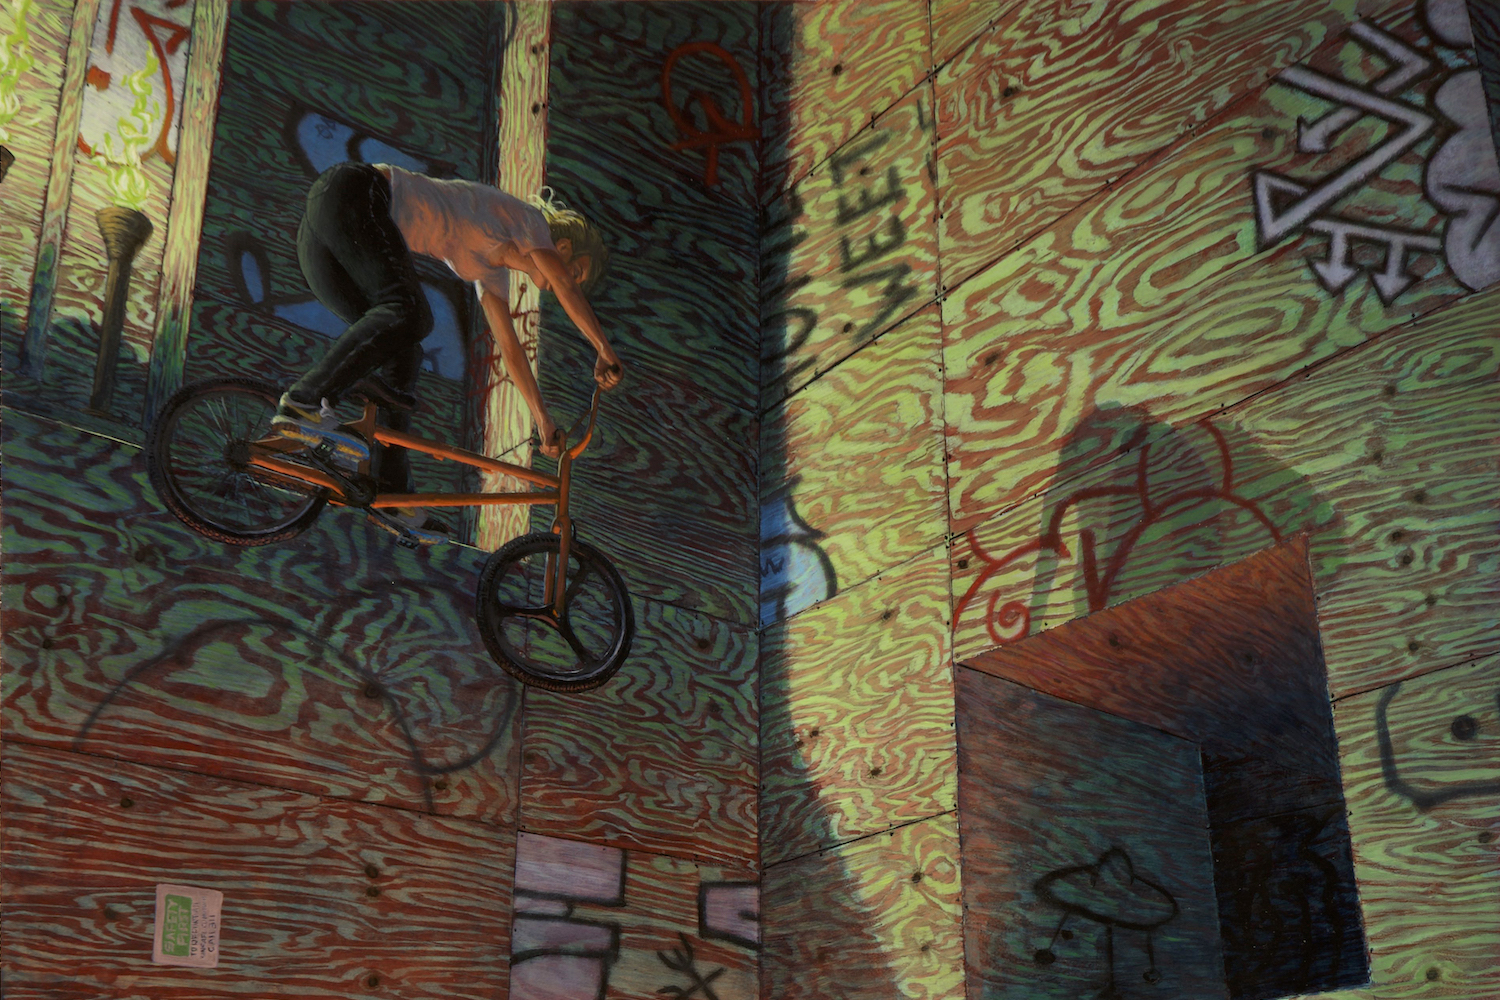 Man riding a bike mid-air, walls are covered in writing